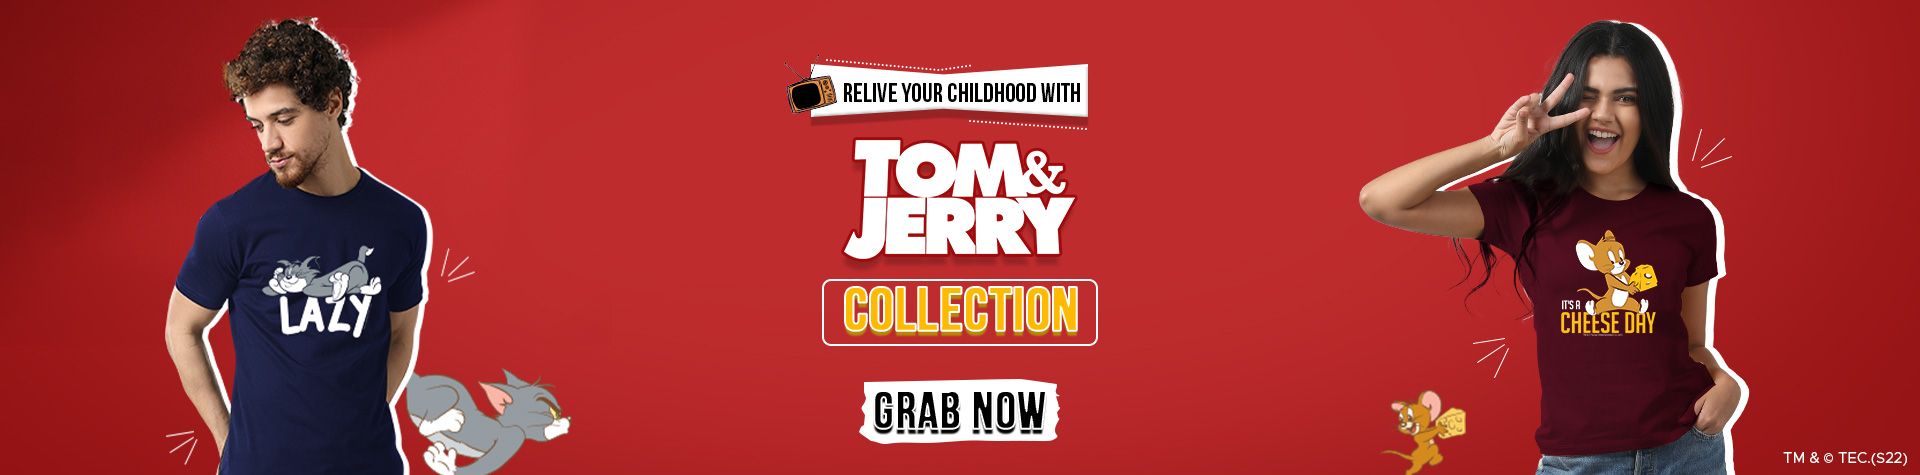 Tom and Jerry T Shirts